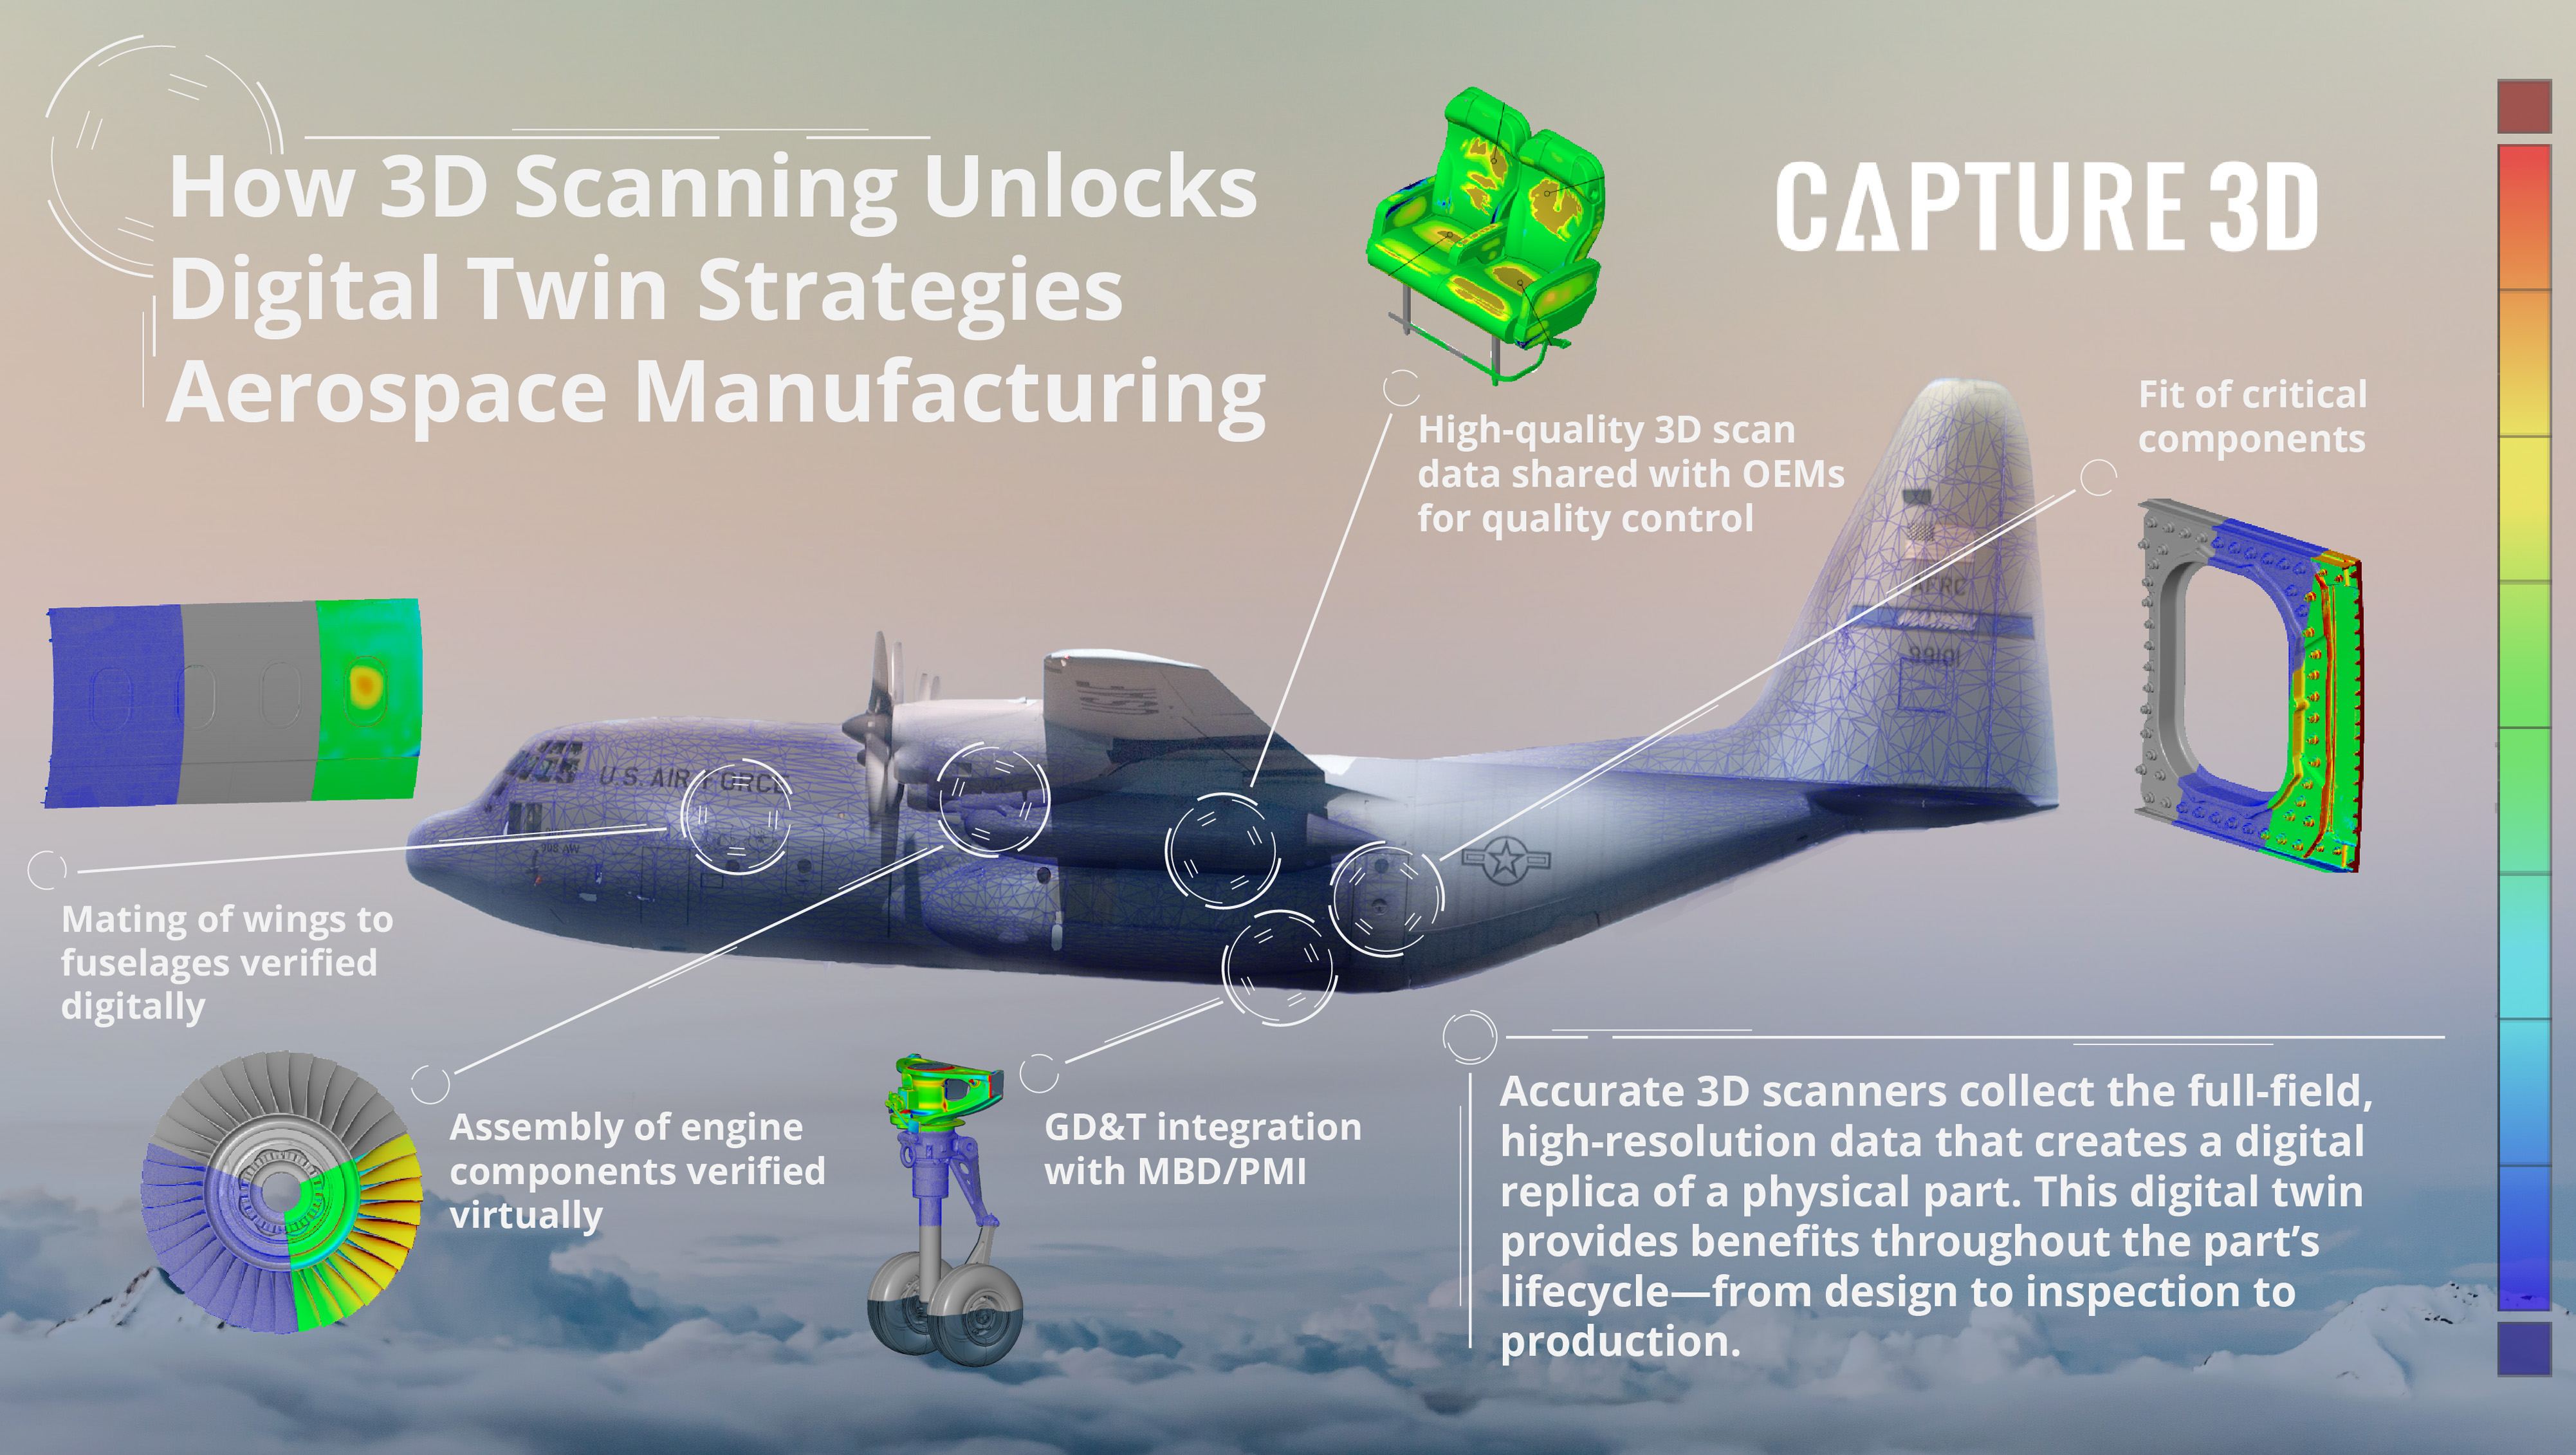 3D scanning is the gateway to digital twin strategies